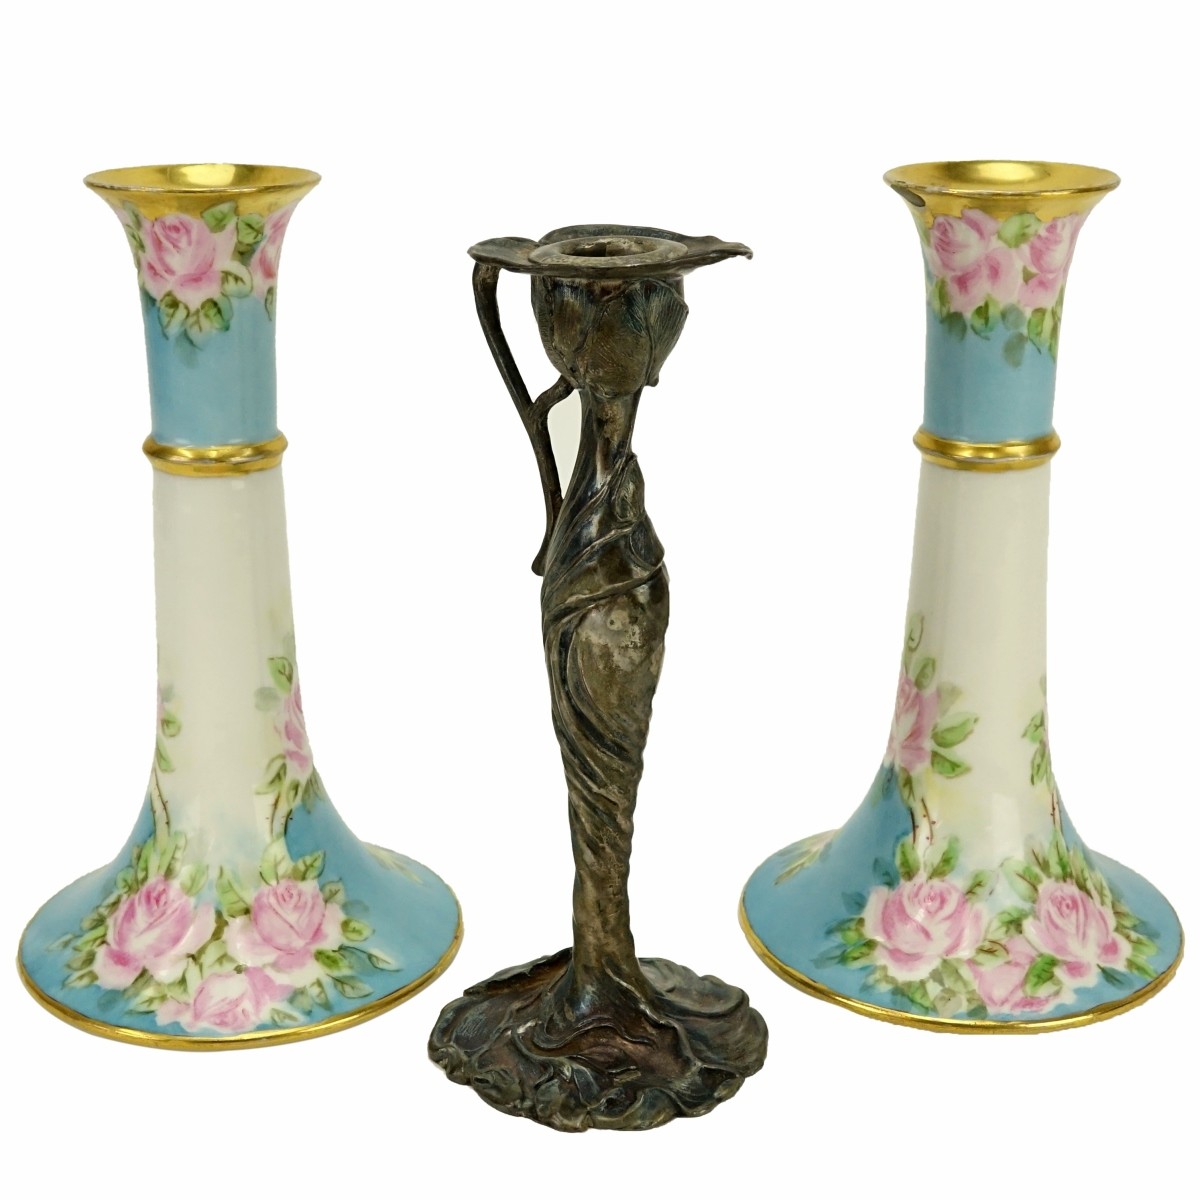 Grouping of Three (3): Pair of Limoges Porcelain